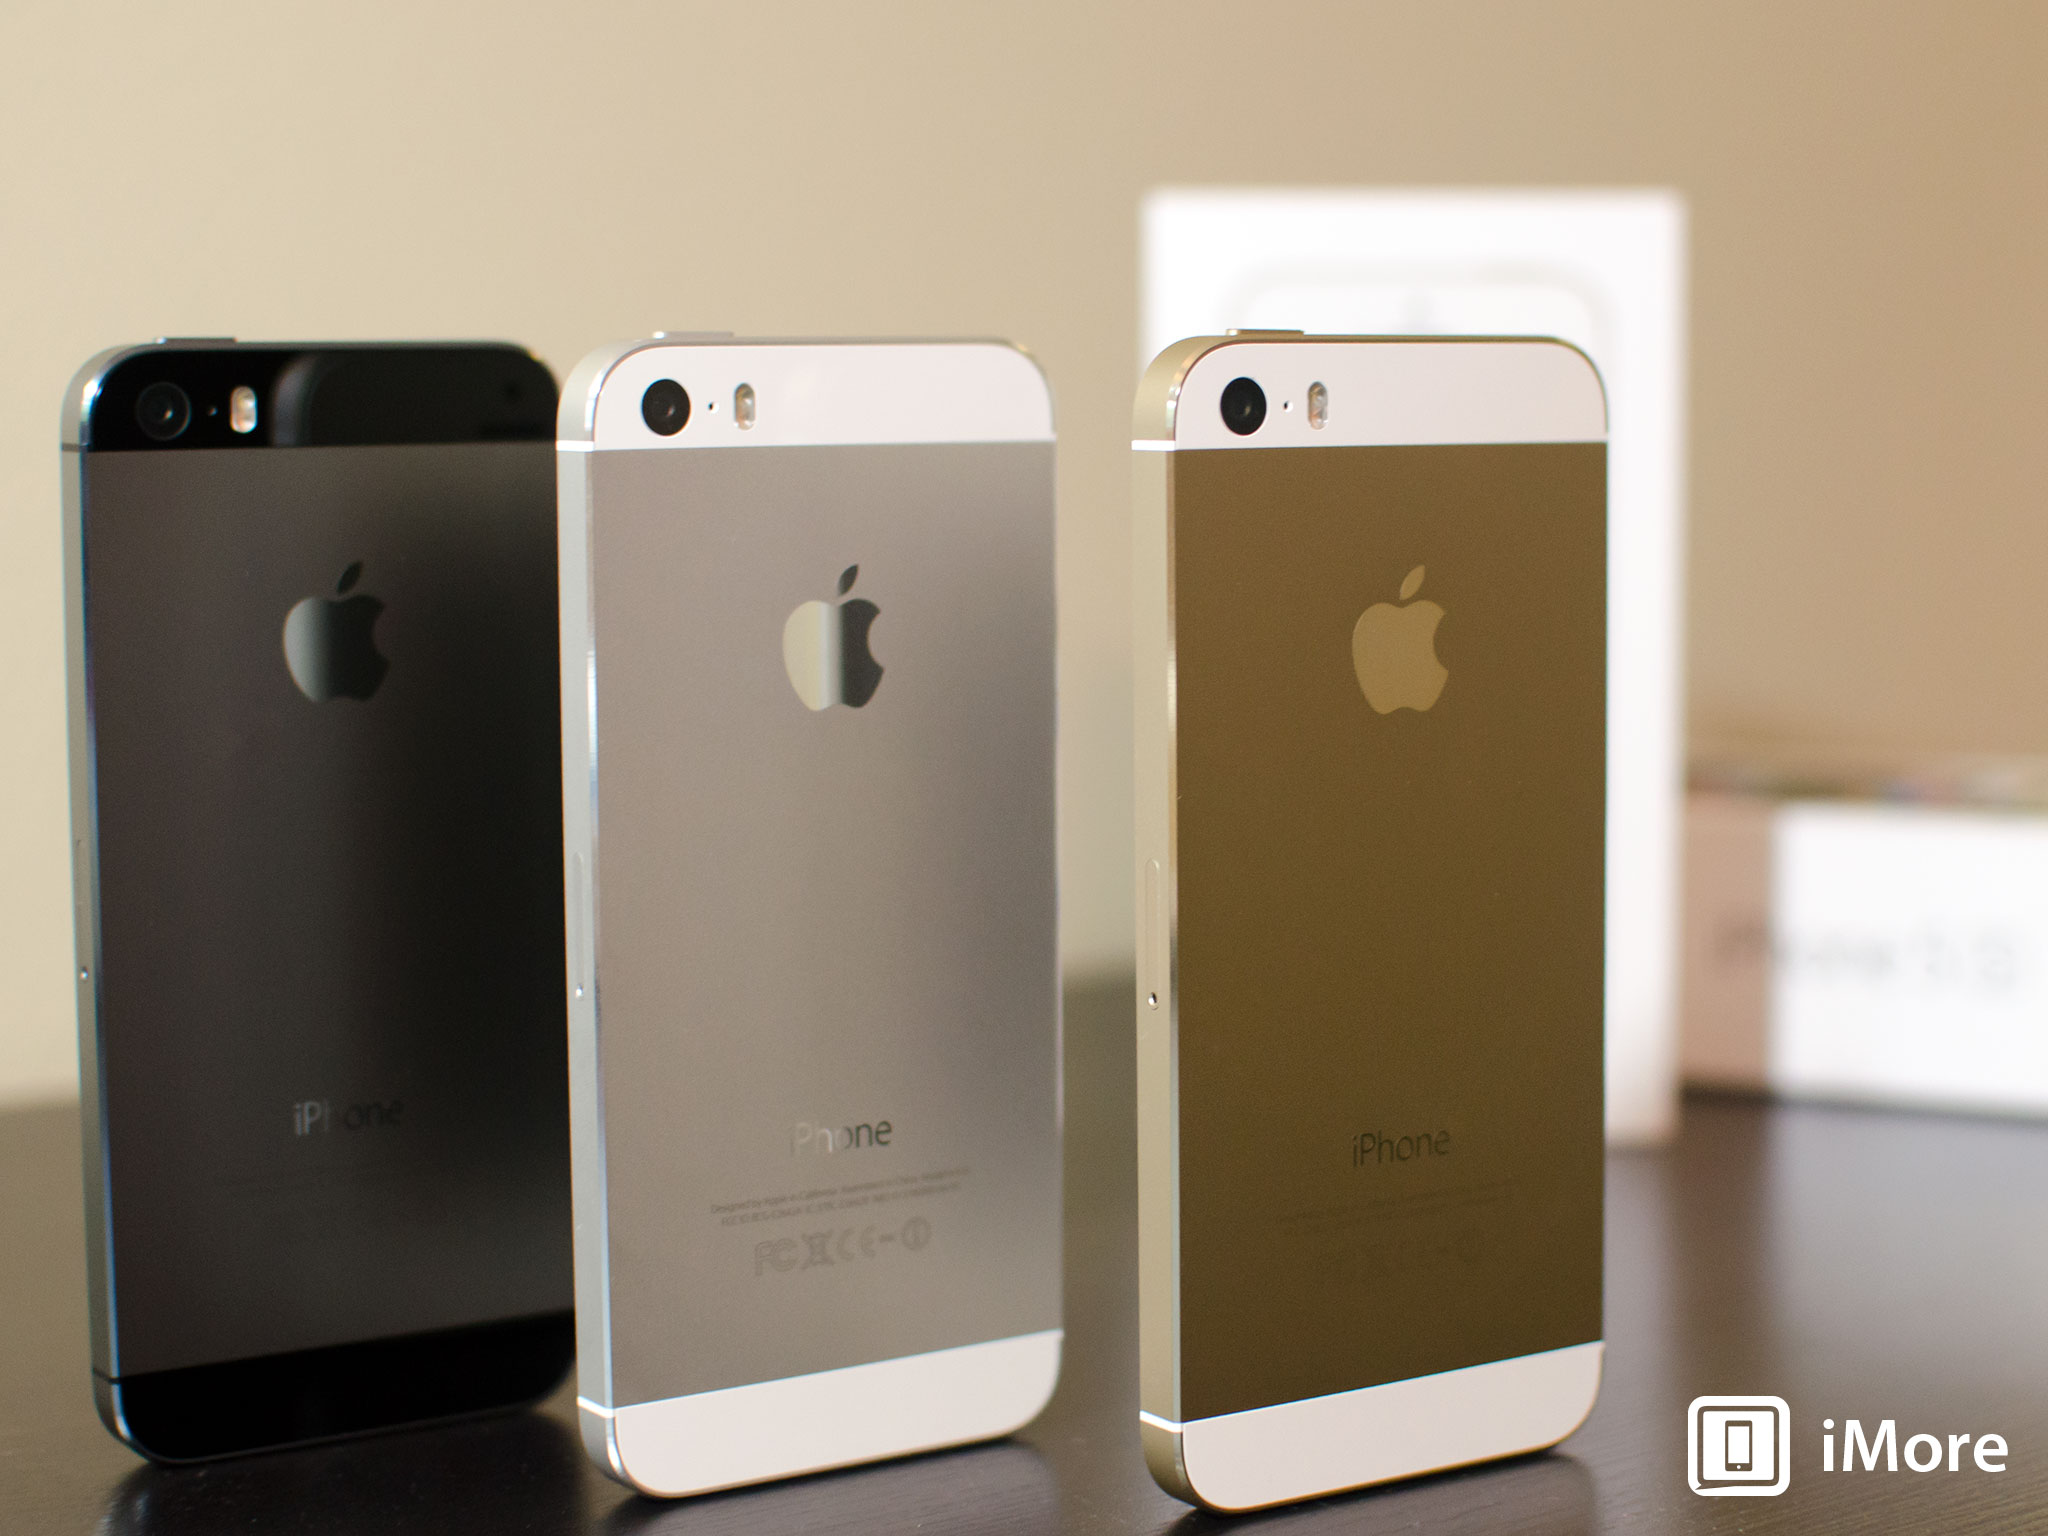 16GB vs. 32GB vs. 64GB: Which iPhone 5c and iPhone 5s storage size